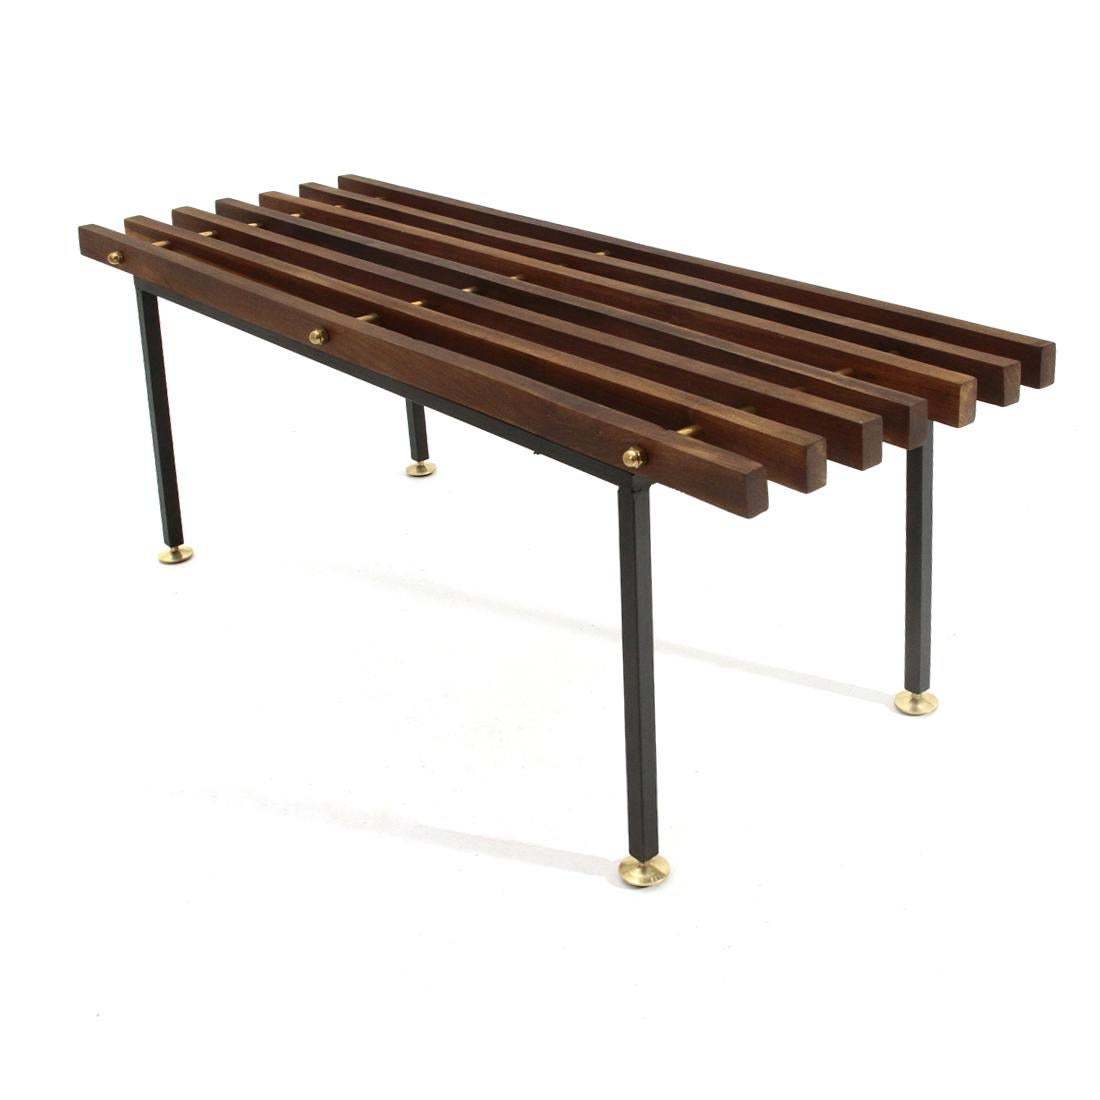 Bench of Italian manufacture produced in the 1950s.
Black painted metal structure with brass feet, adjustable in height.
Seat with solid wood slats with brass spacers.
Good general condition, some signs on the wooden part.

Dimensions: Length